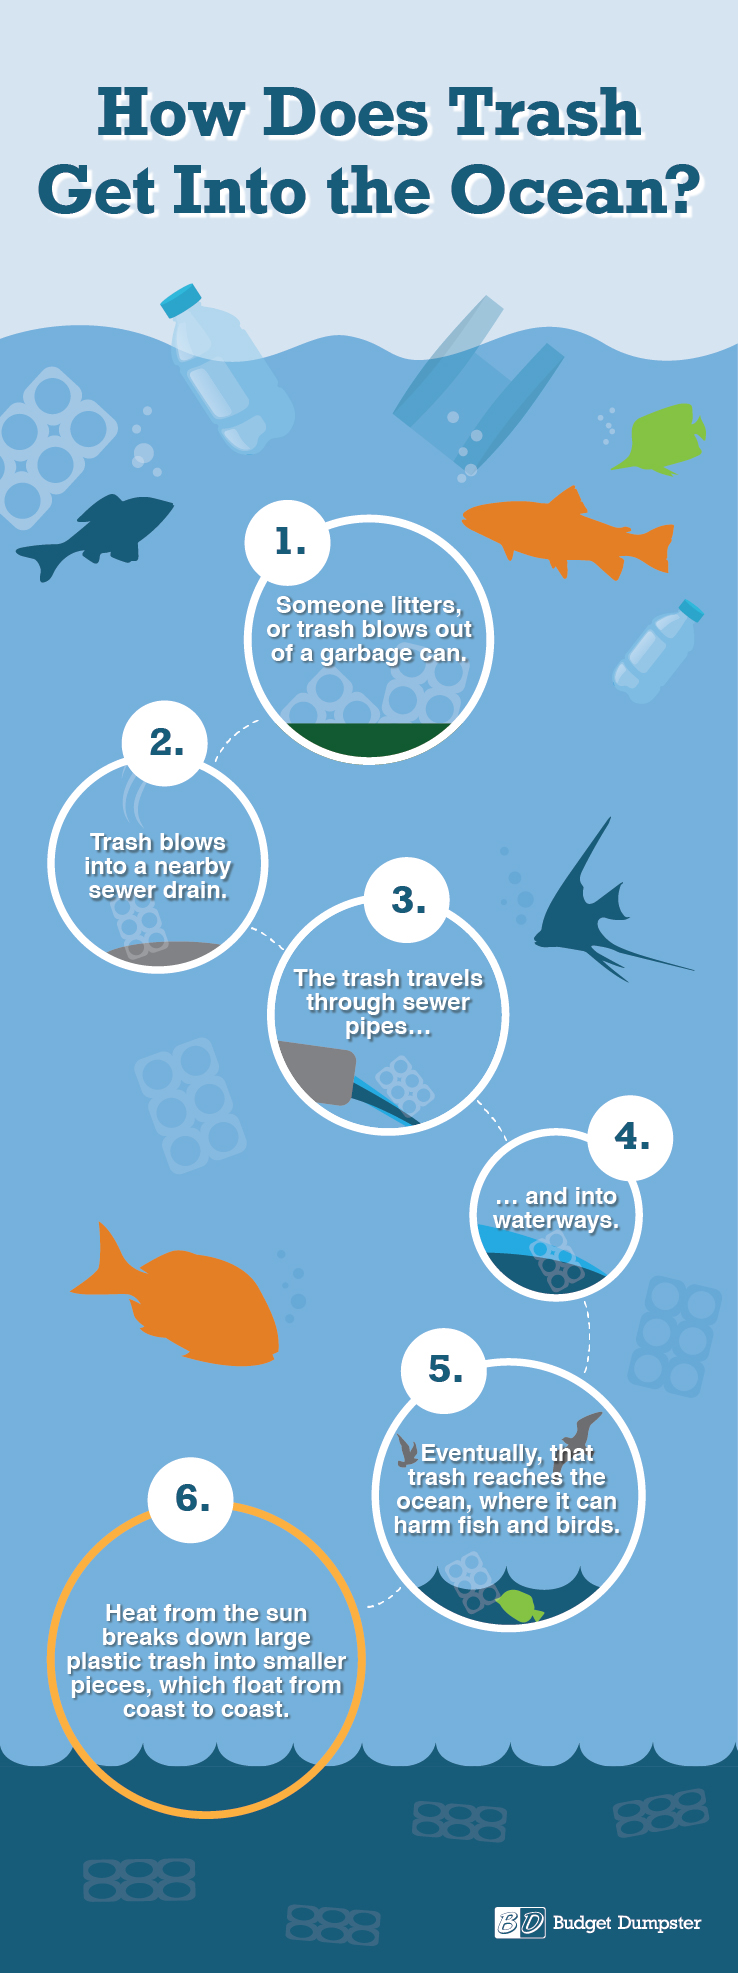 How Does Trash Get Into the Ocean?